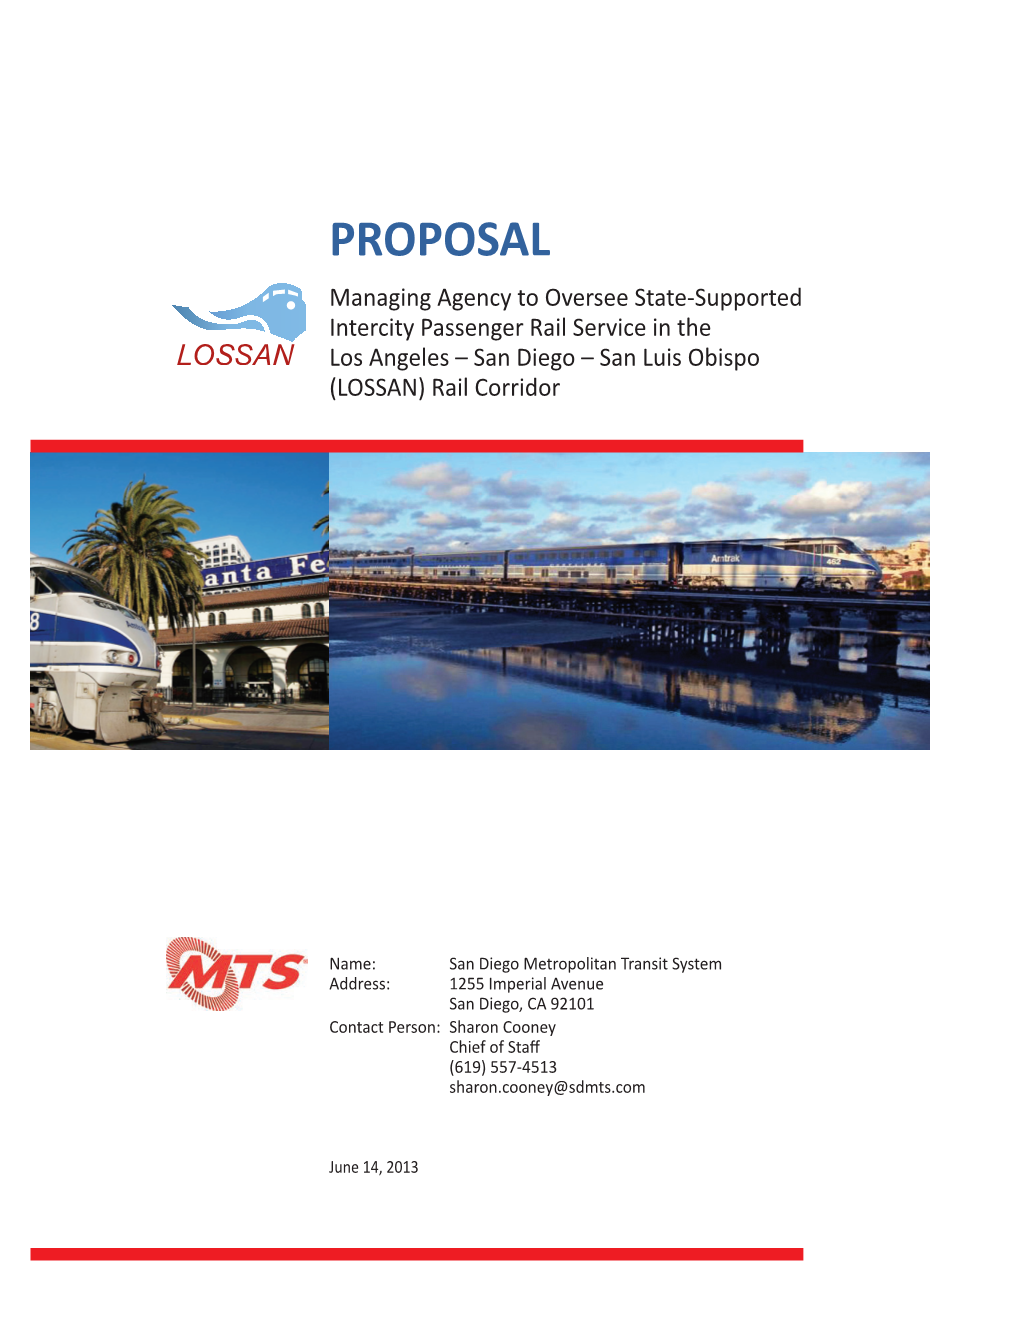 Managing Agency Proposal from SDMTS